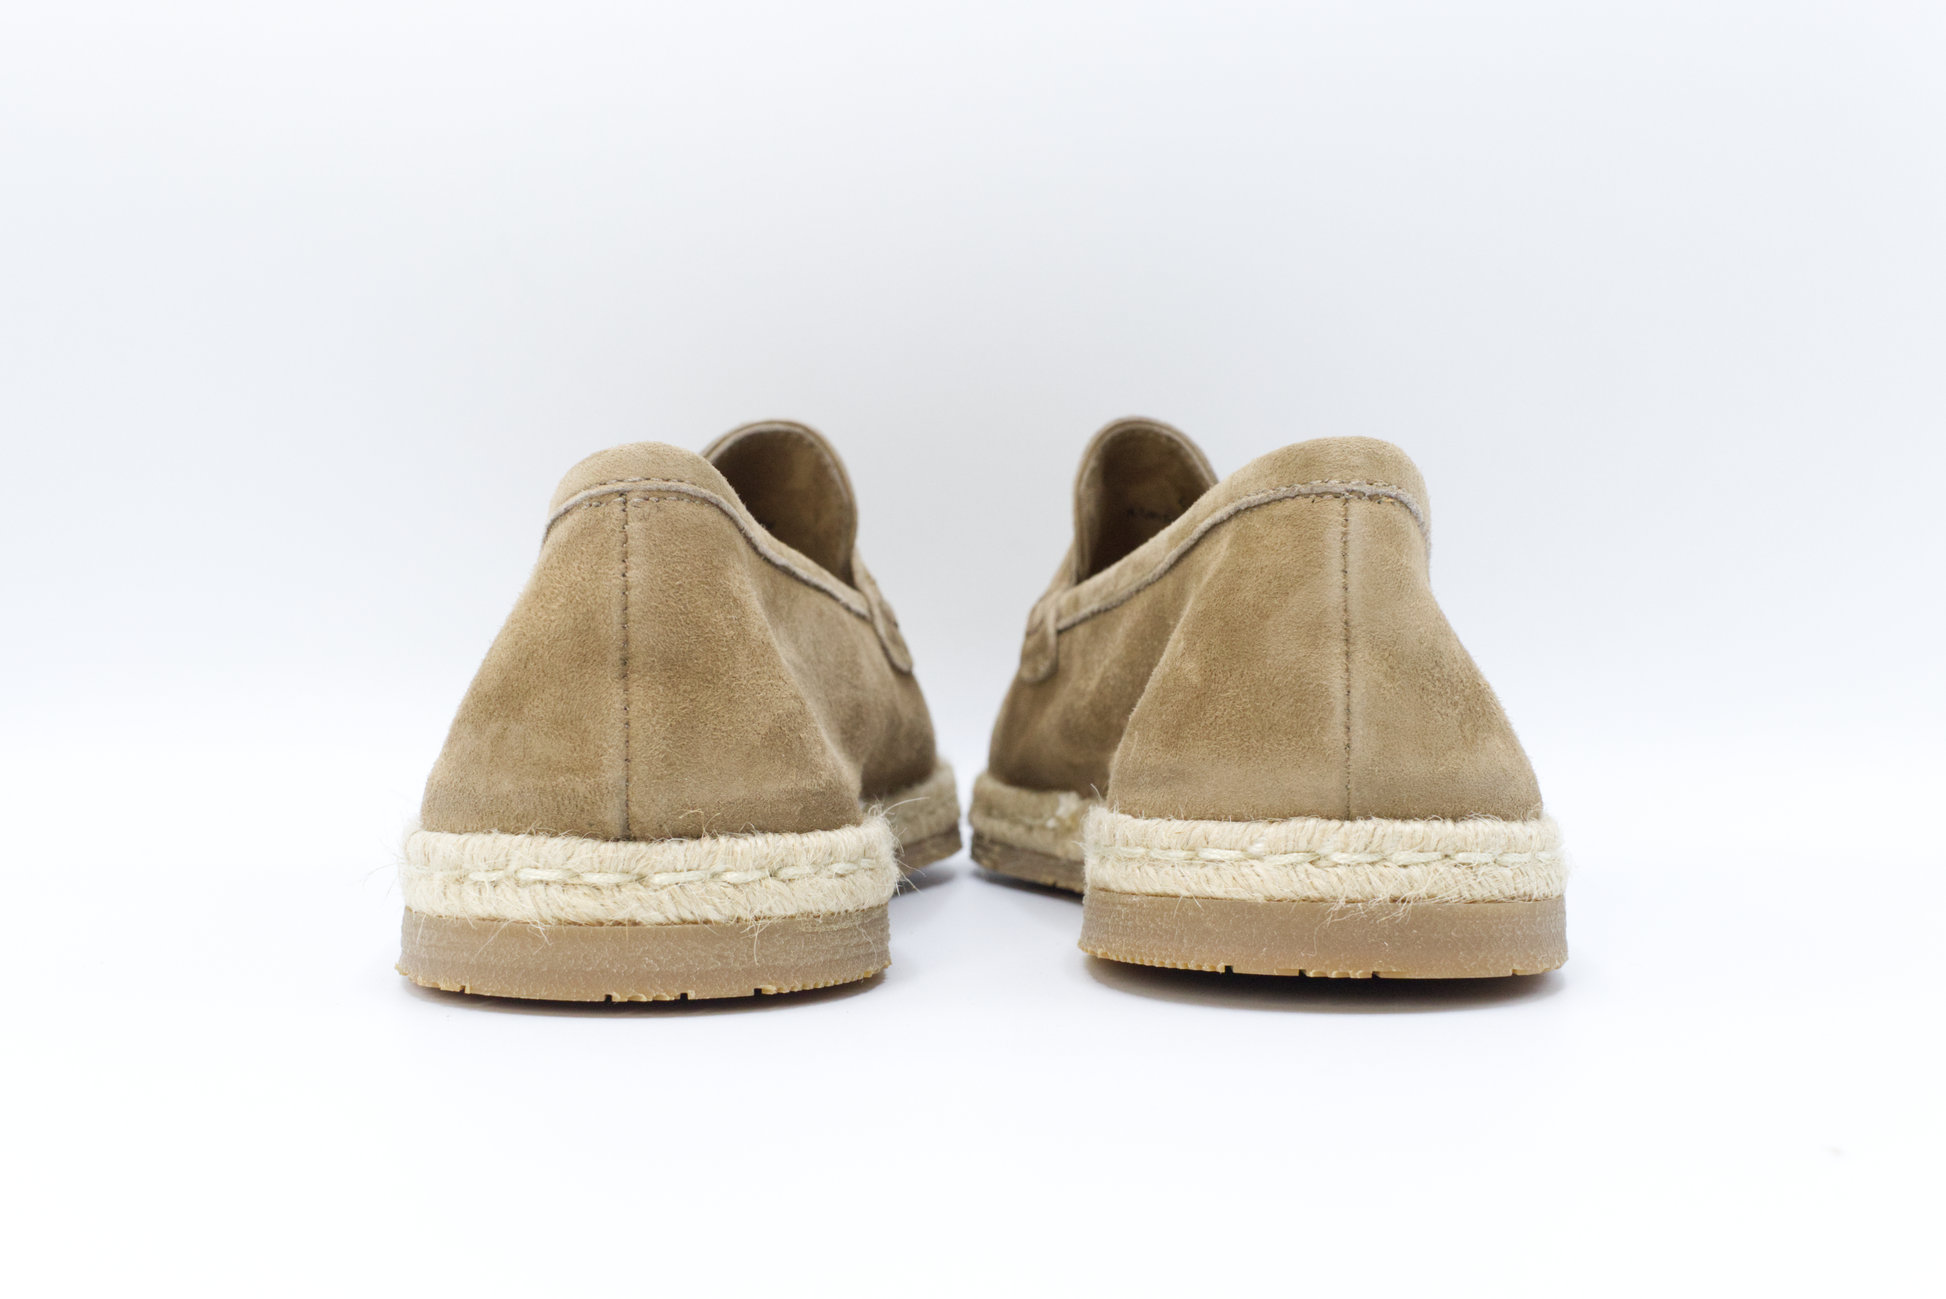 Shop Handmade Men's Suede Espadrille Style Loafer in Beige or browse our range of hand-made Italian sneakers for men in leather or suede. We deliver to the USA and Canada & offer multiple payment plans as well as accept multiple safe & secure payment methods.